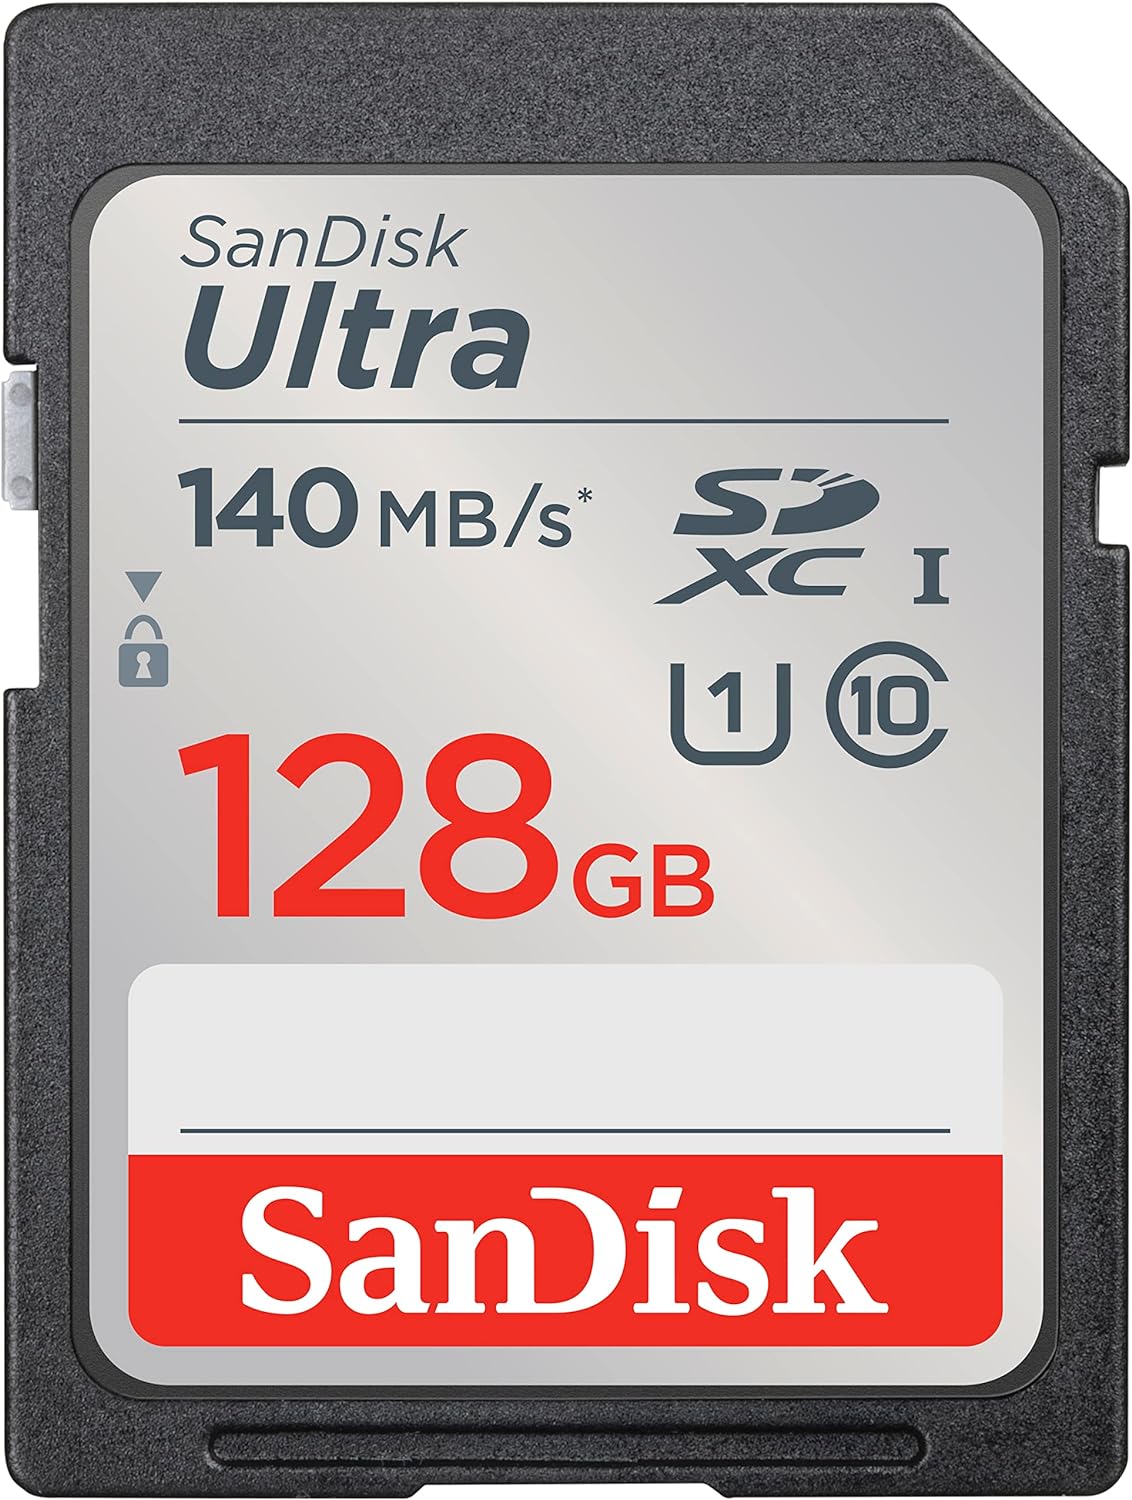 Long-term data storage on memory cards